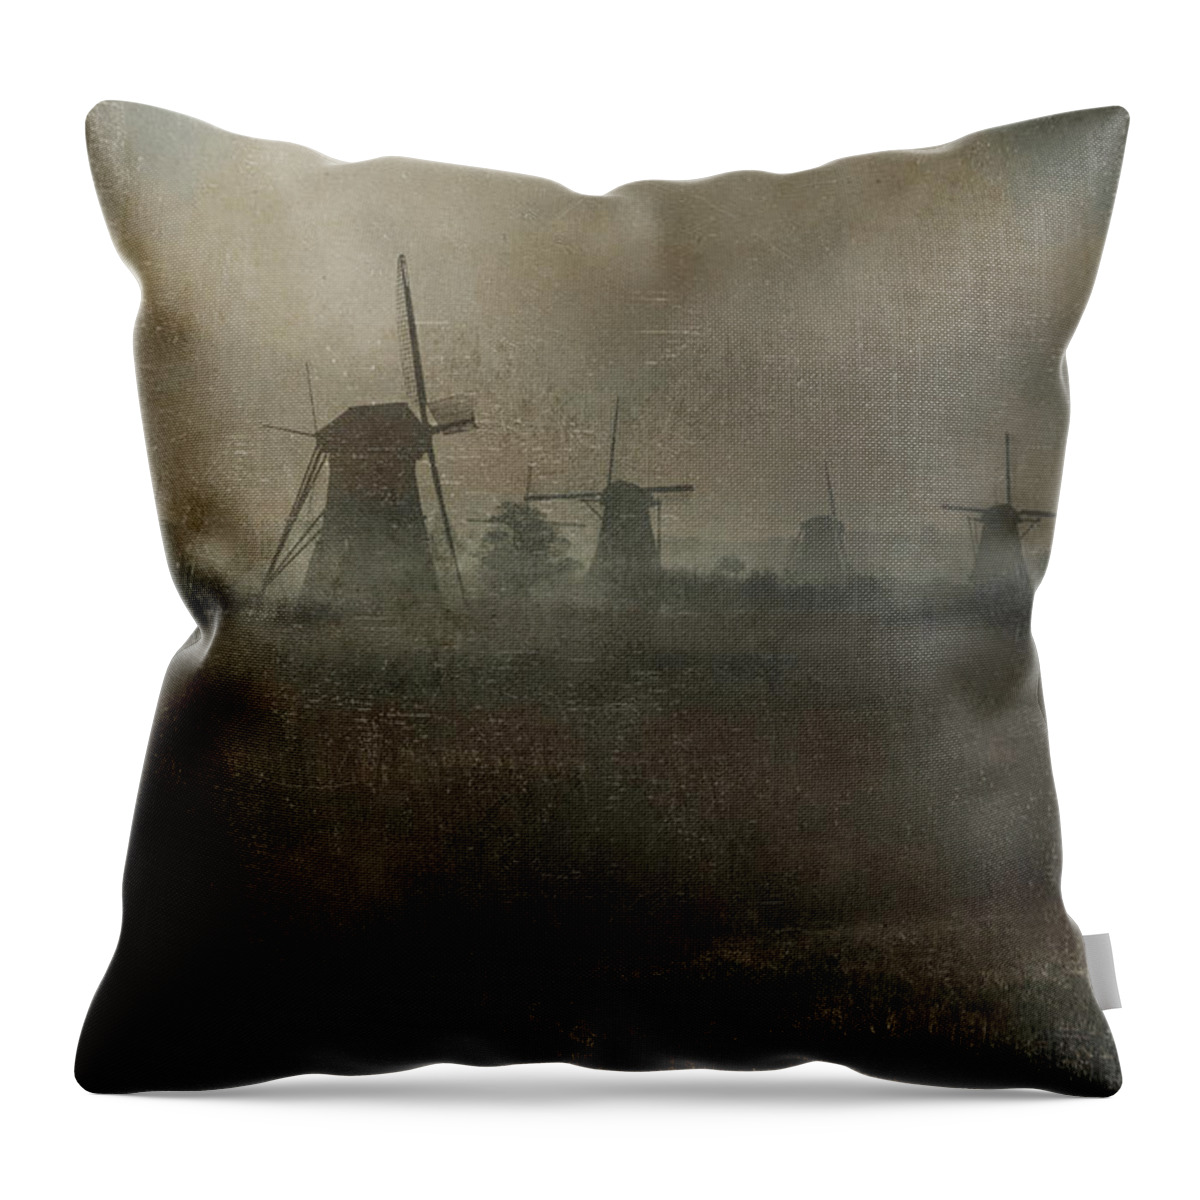 Mill Throw Pillow featuring the photograph Windmills #1 by Joana Kruse